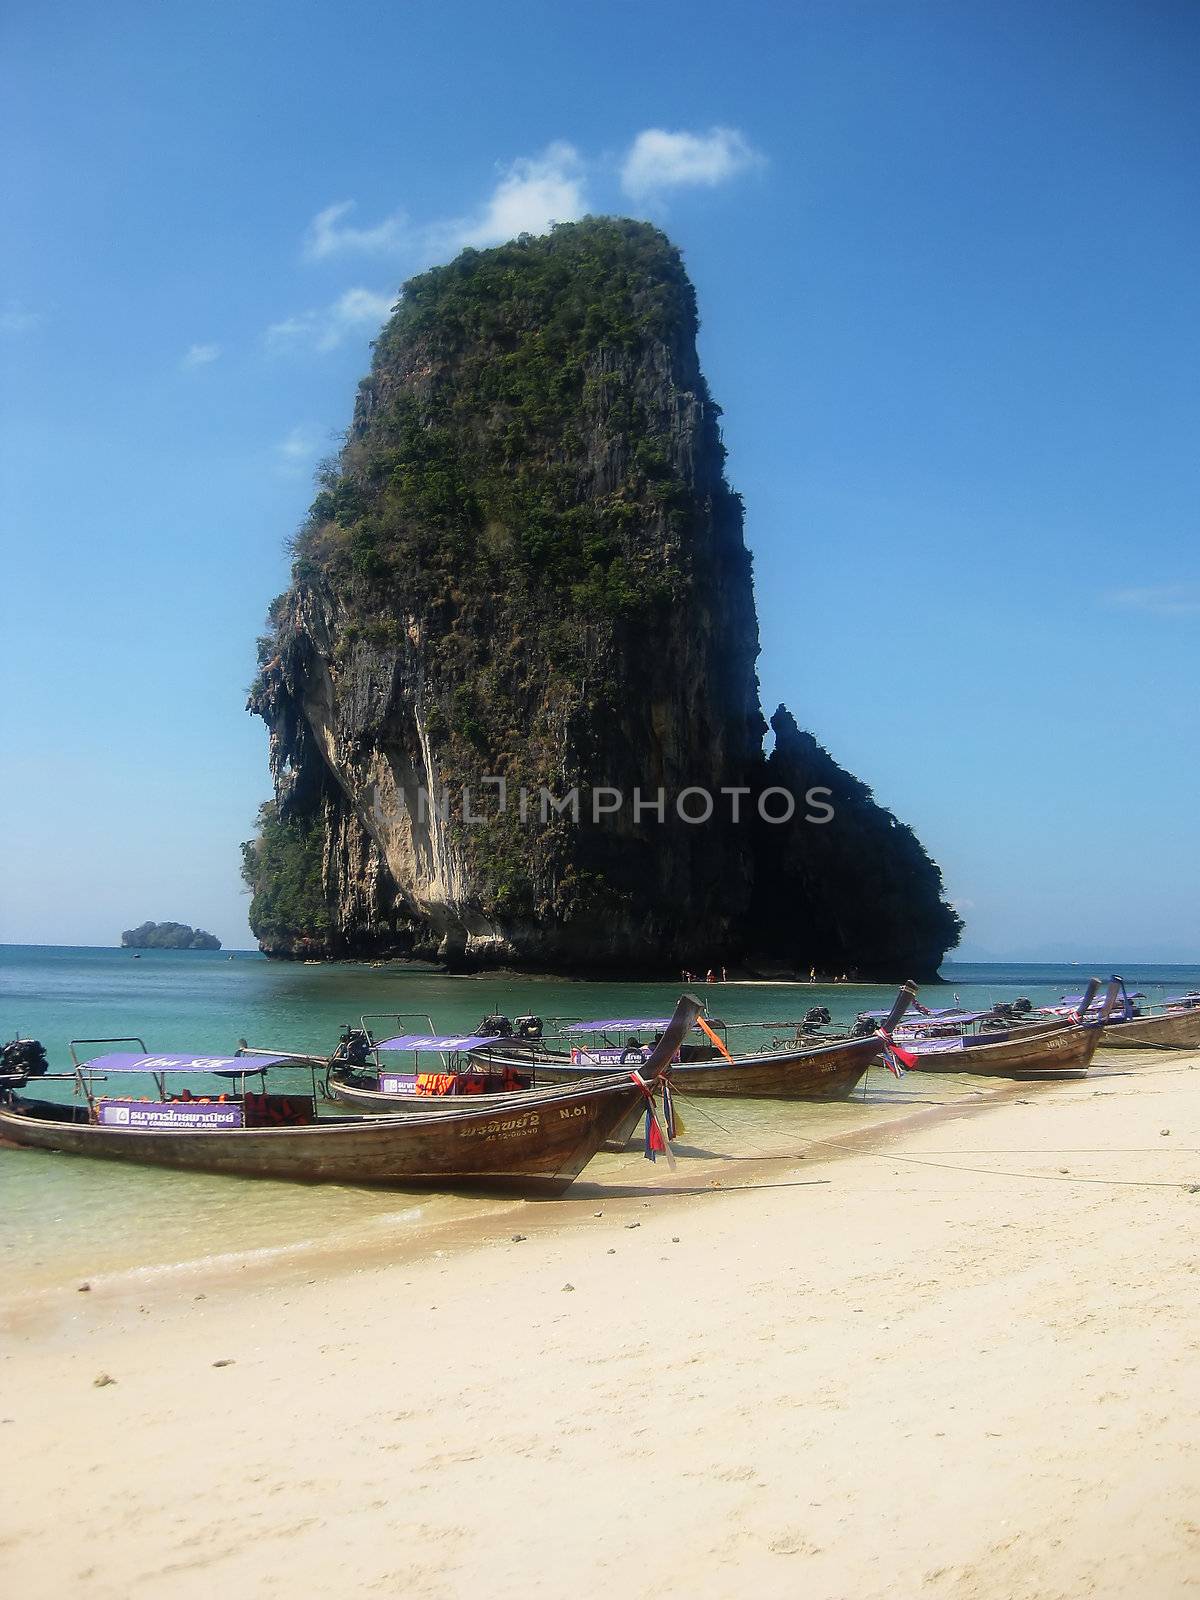 Phra Nang cave beach with longtail boats in Thailand